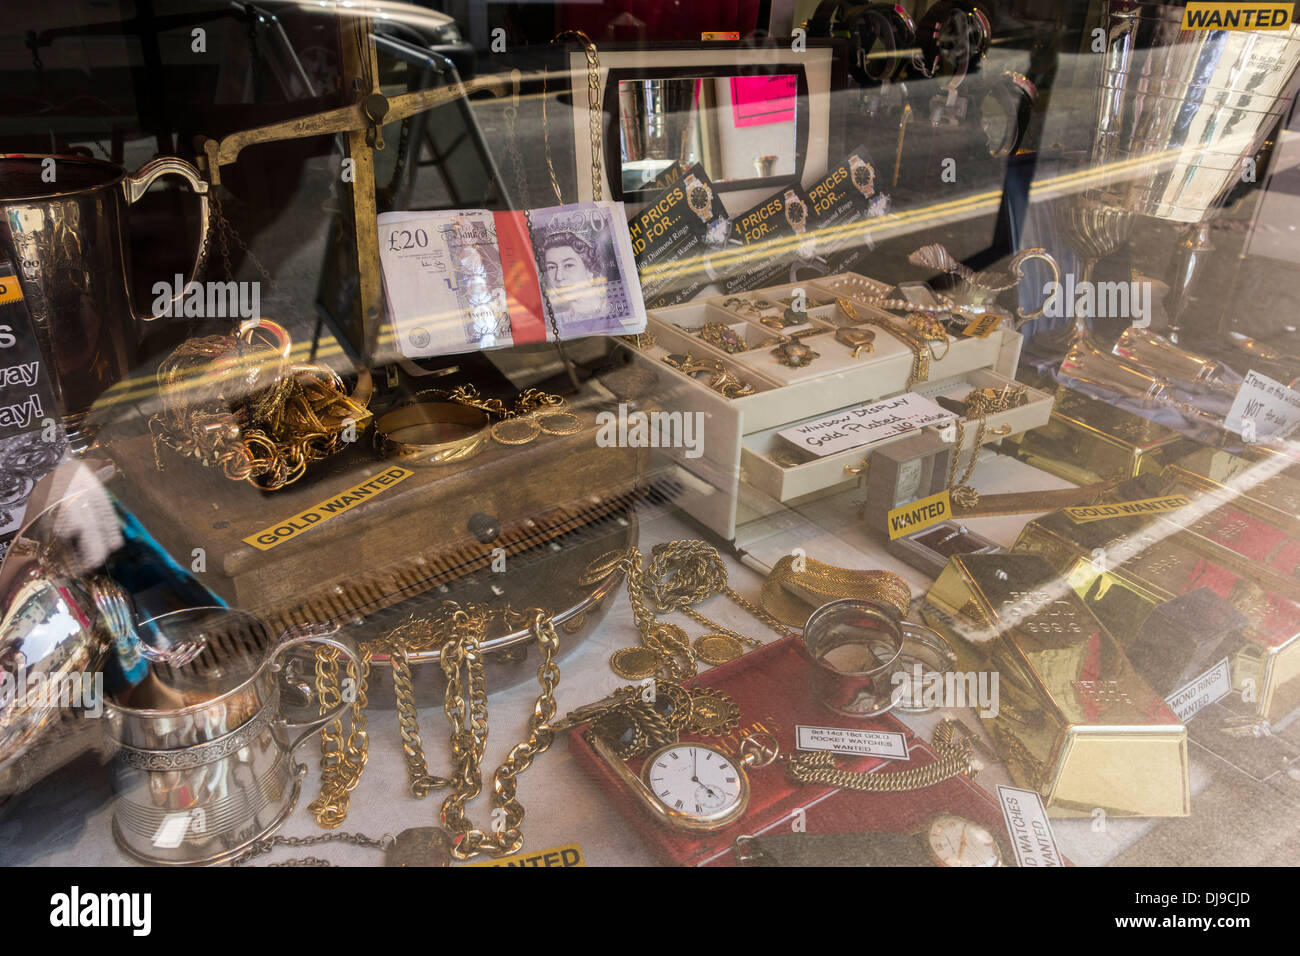 Window display of shop that buys gold and jewelery for cash, UK Stock Photo